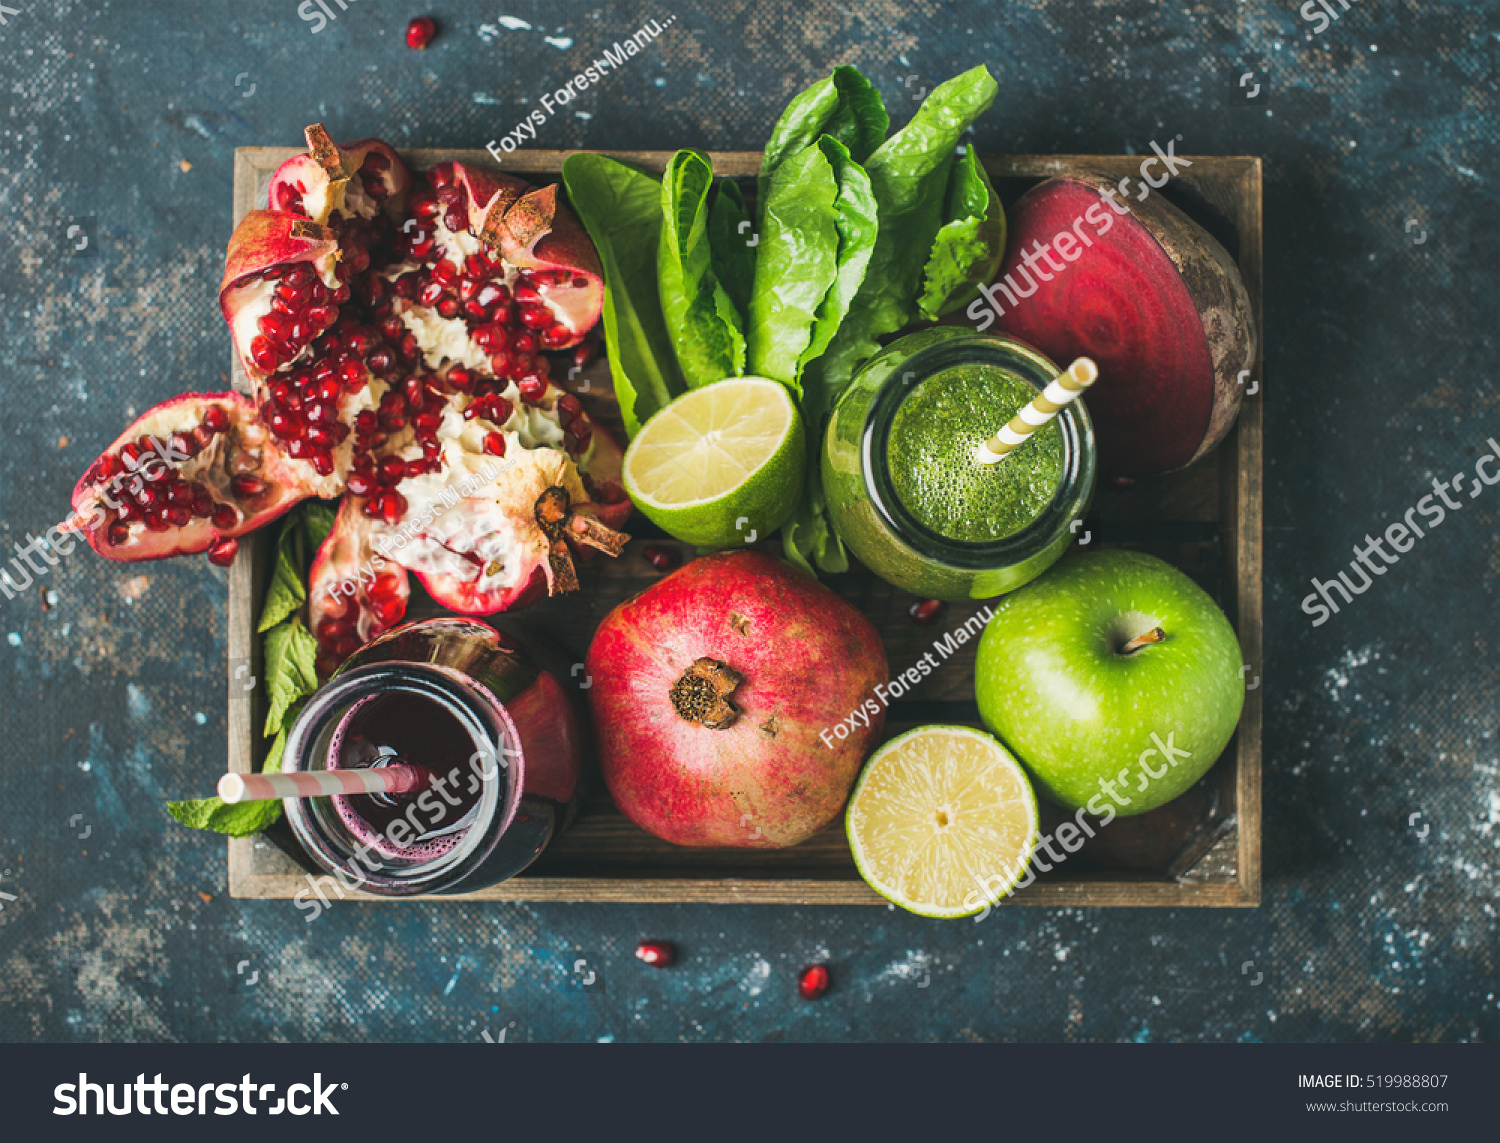 Green and purple fresh juices or smoothies with fruit, greens, vegetables in wooden tray, top view, selective focus. Detox, dieting, clean eating, vegetarian, vegan, fitness, healthy lifestyle concept #519988807